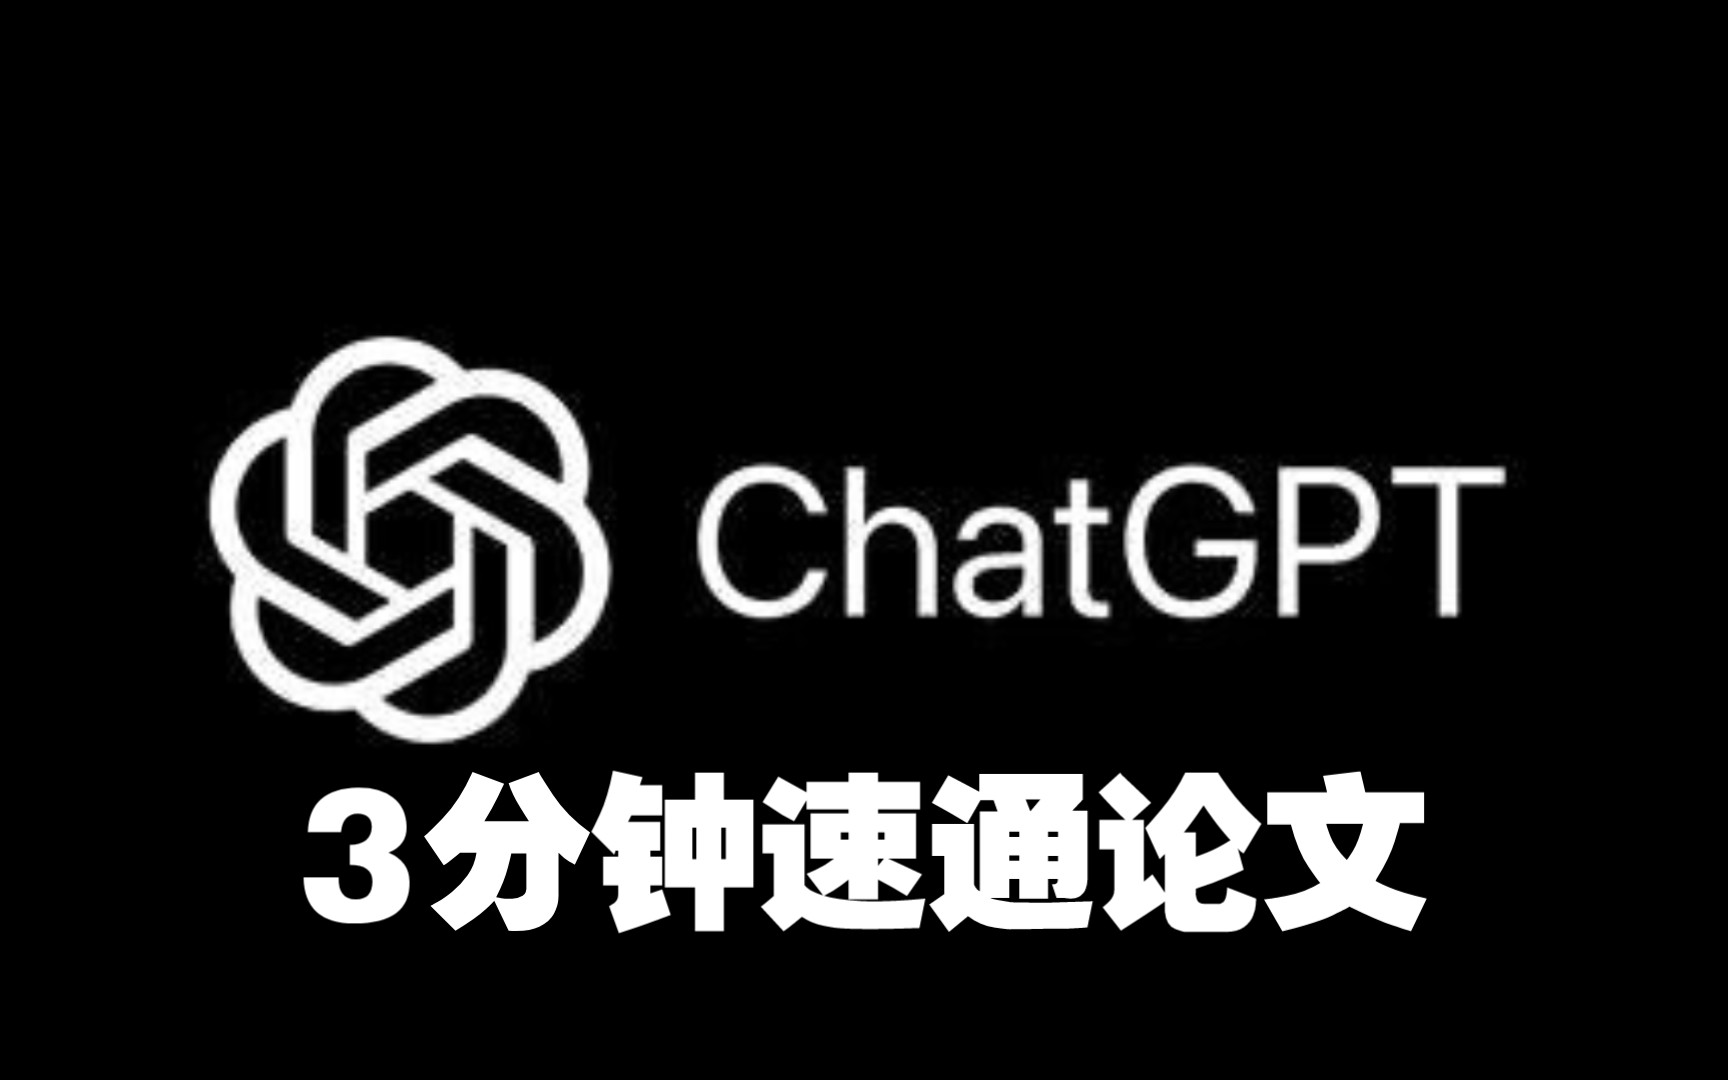 Login to ChatGPT in China – Chat GPT Login